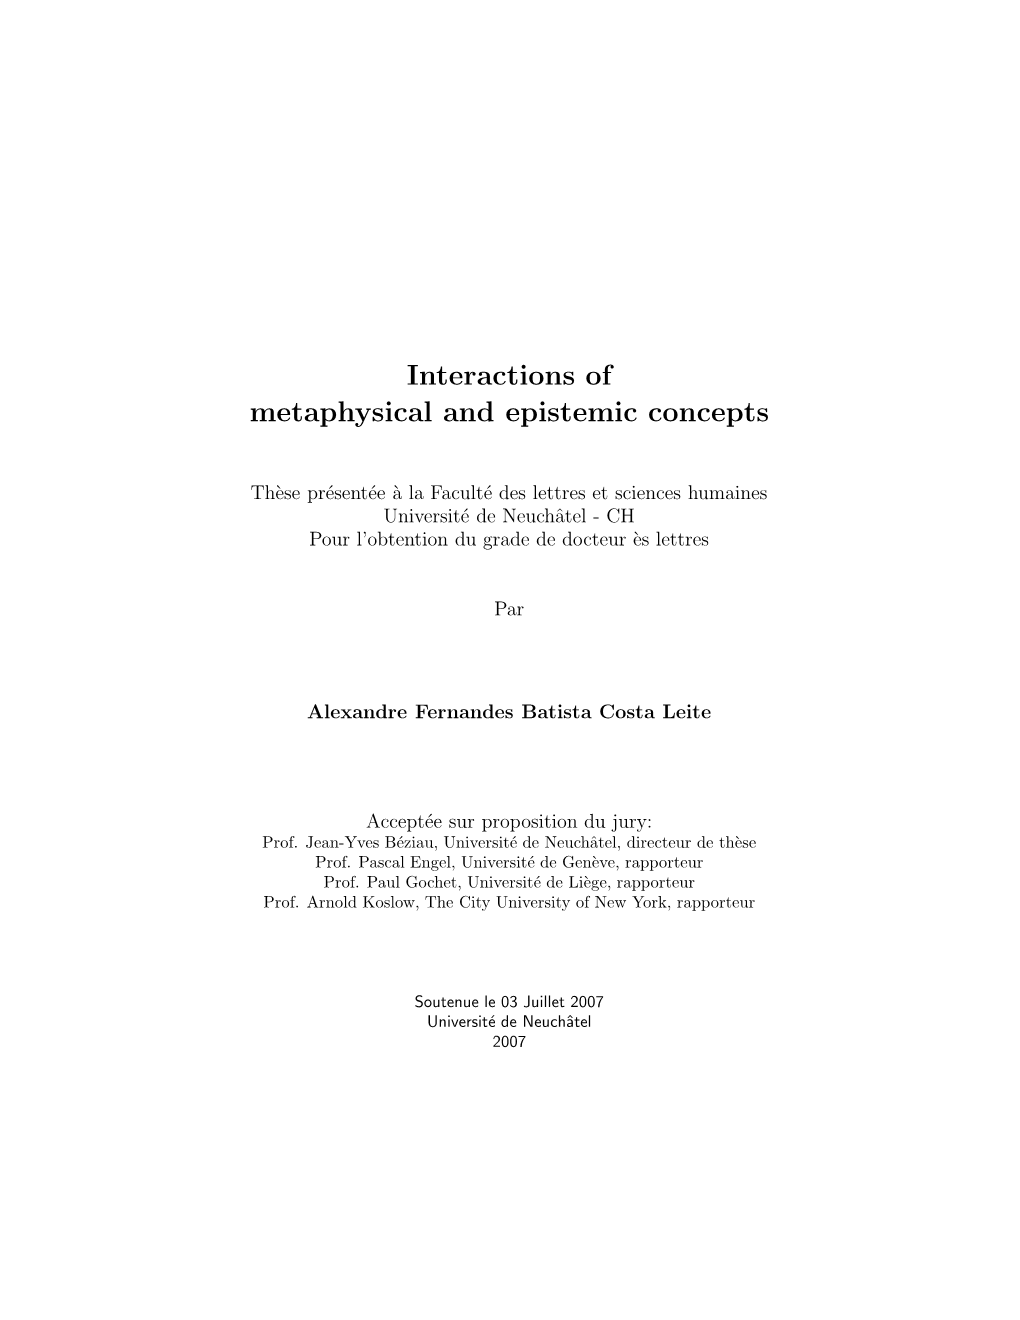 Interactions of Metaphysical and Epistemic Concepts